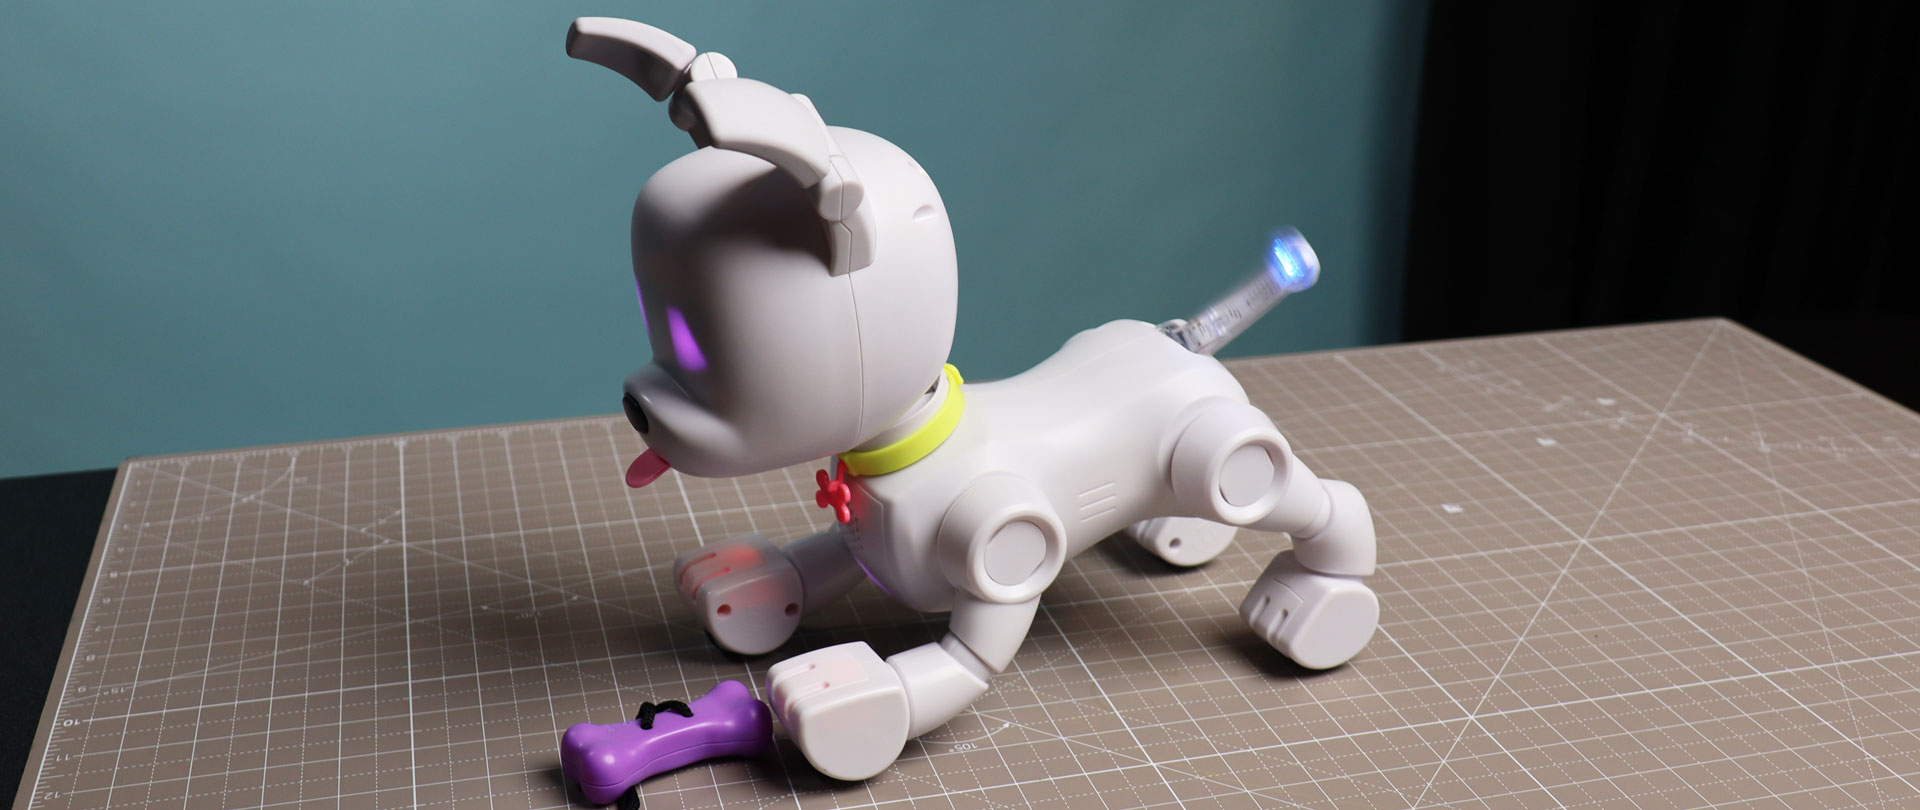 Smart Robot Dog Toys For Kids, Interactive Dog Toys For Boys, Cute